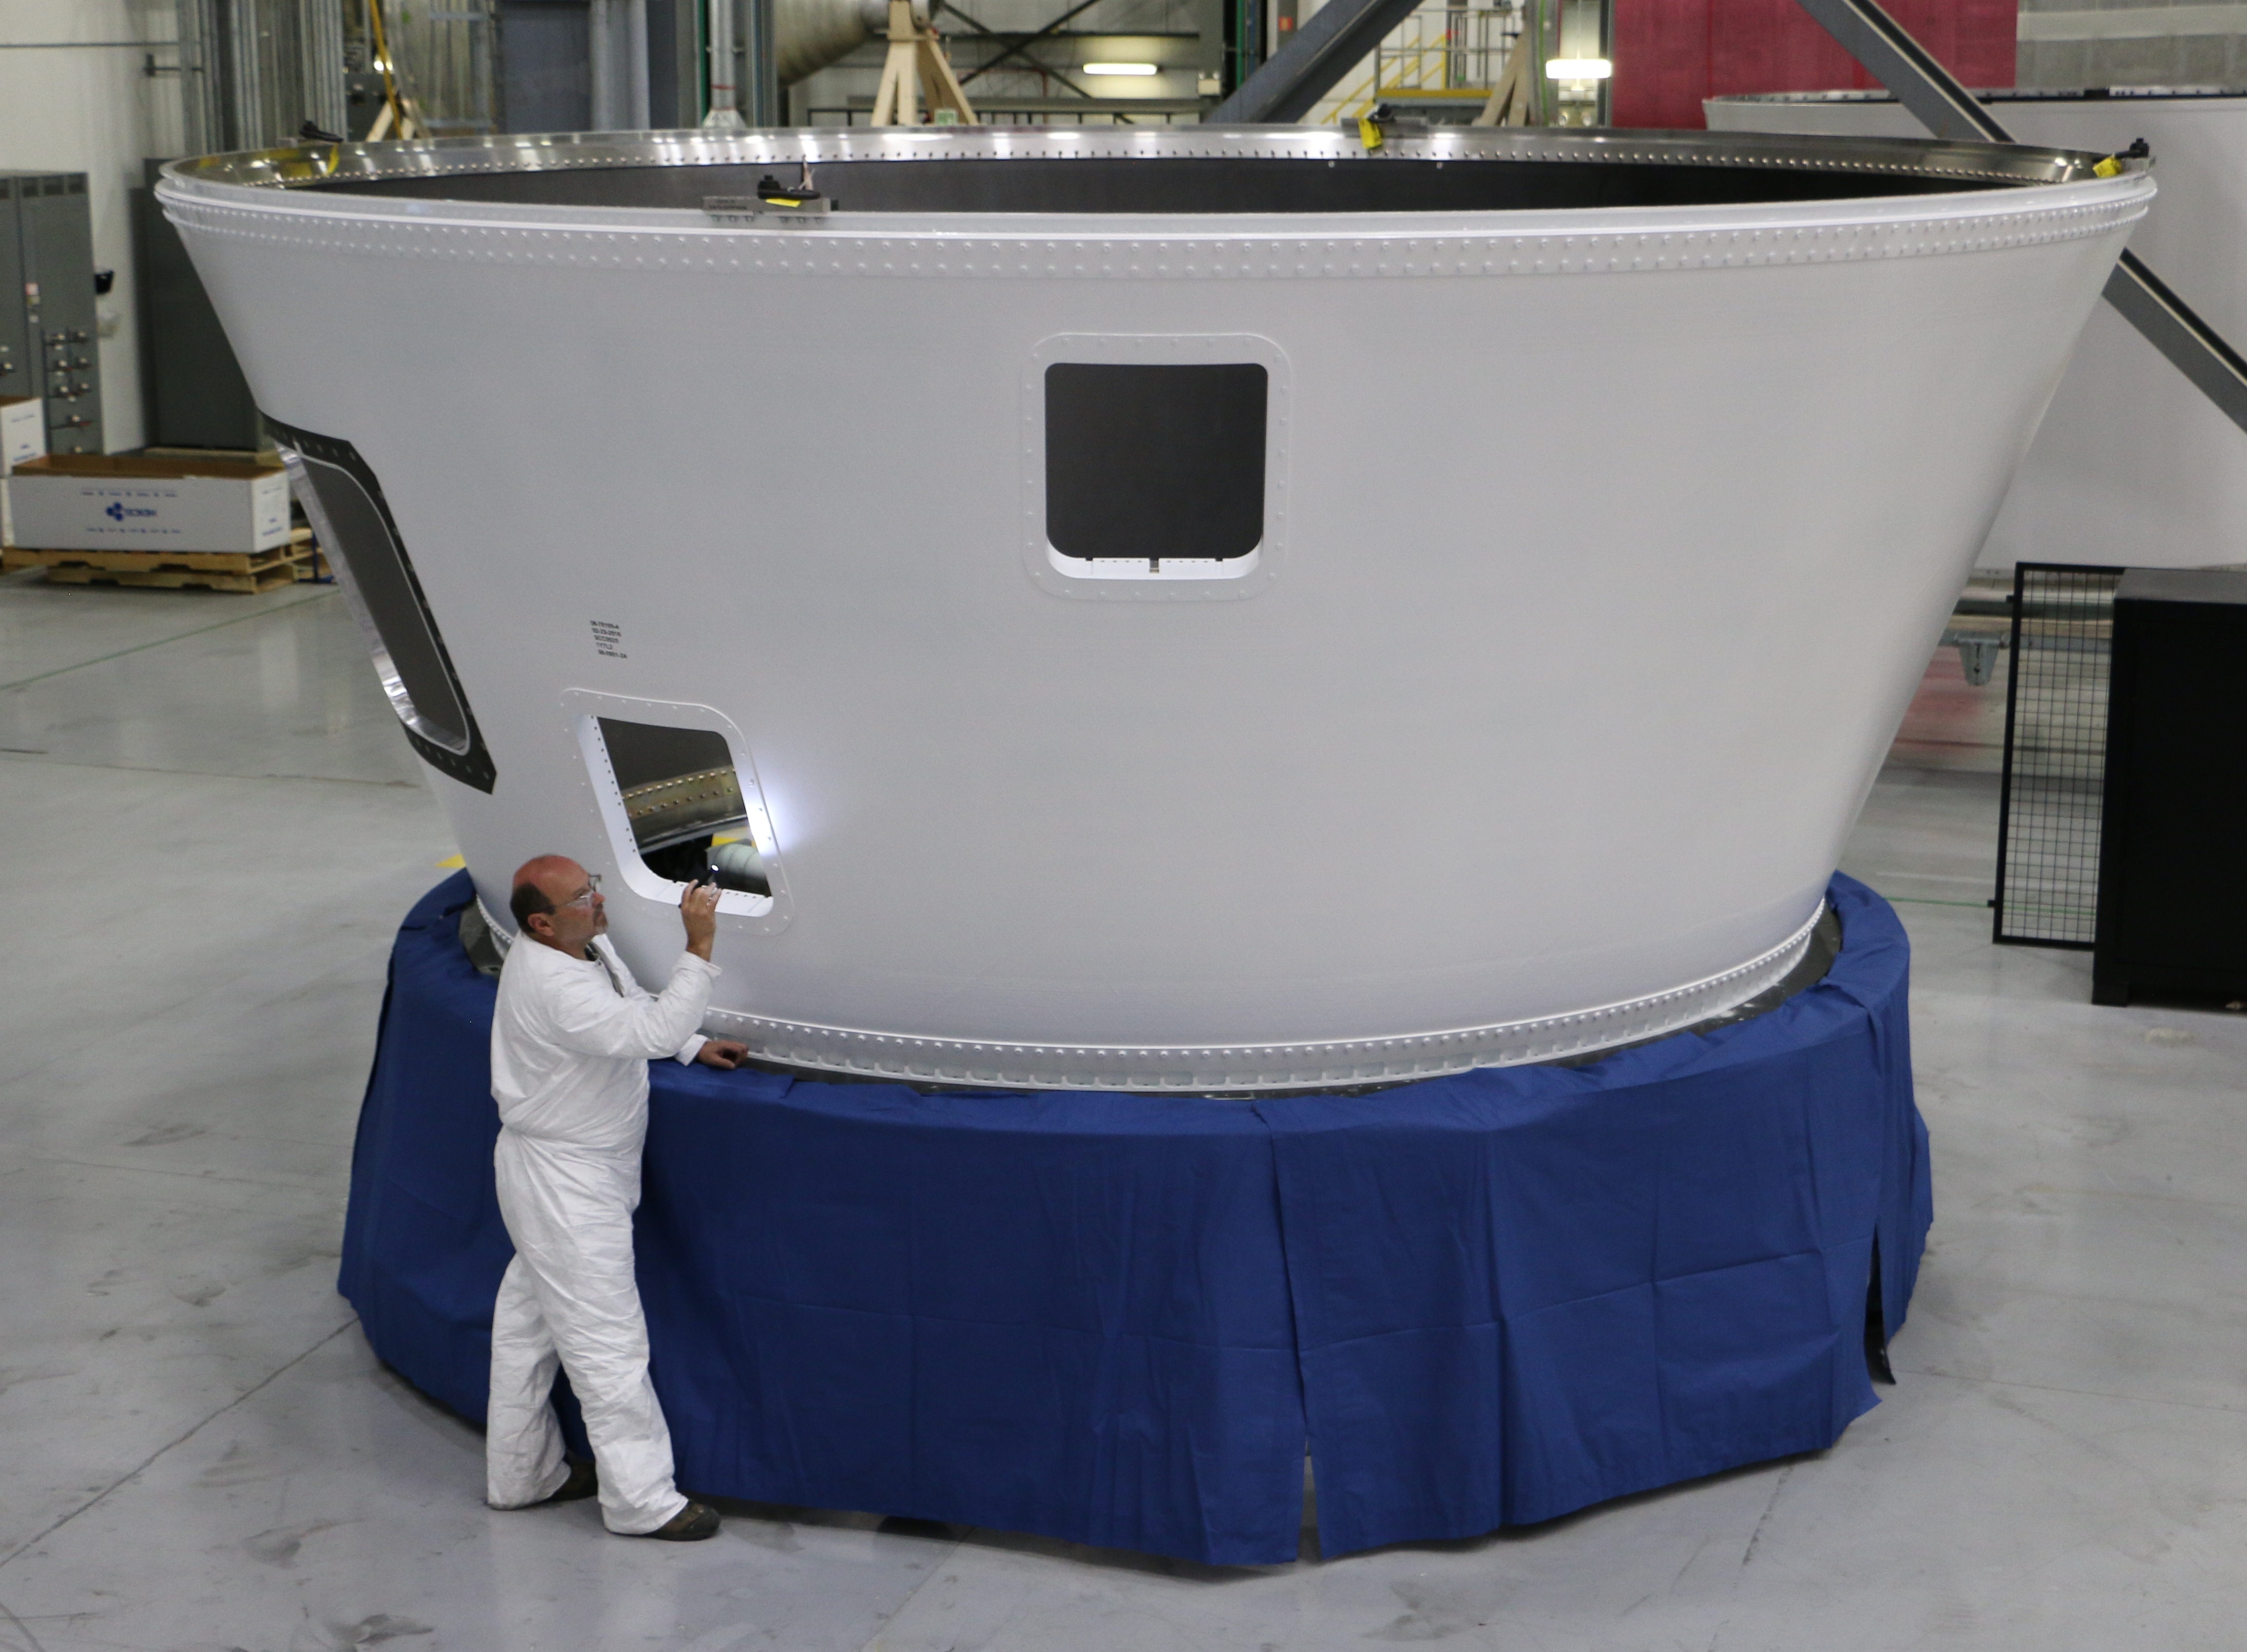 An Orbital ATK employee inspects an Atlas V boat tail, the 500th large composite rocket structure produced at the company's Iuka, Mississippi, facility for United Launch Alliance launch vehicles. (Photo: Business Wire)